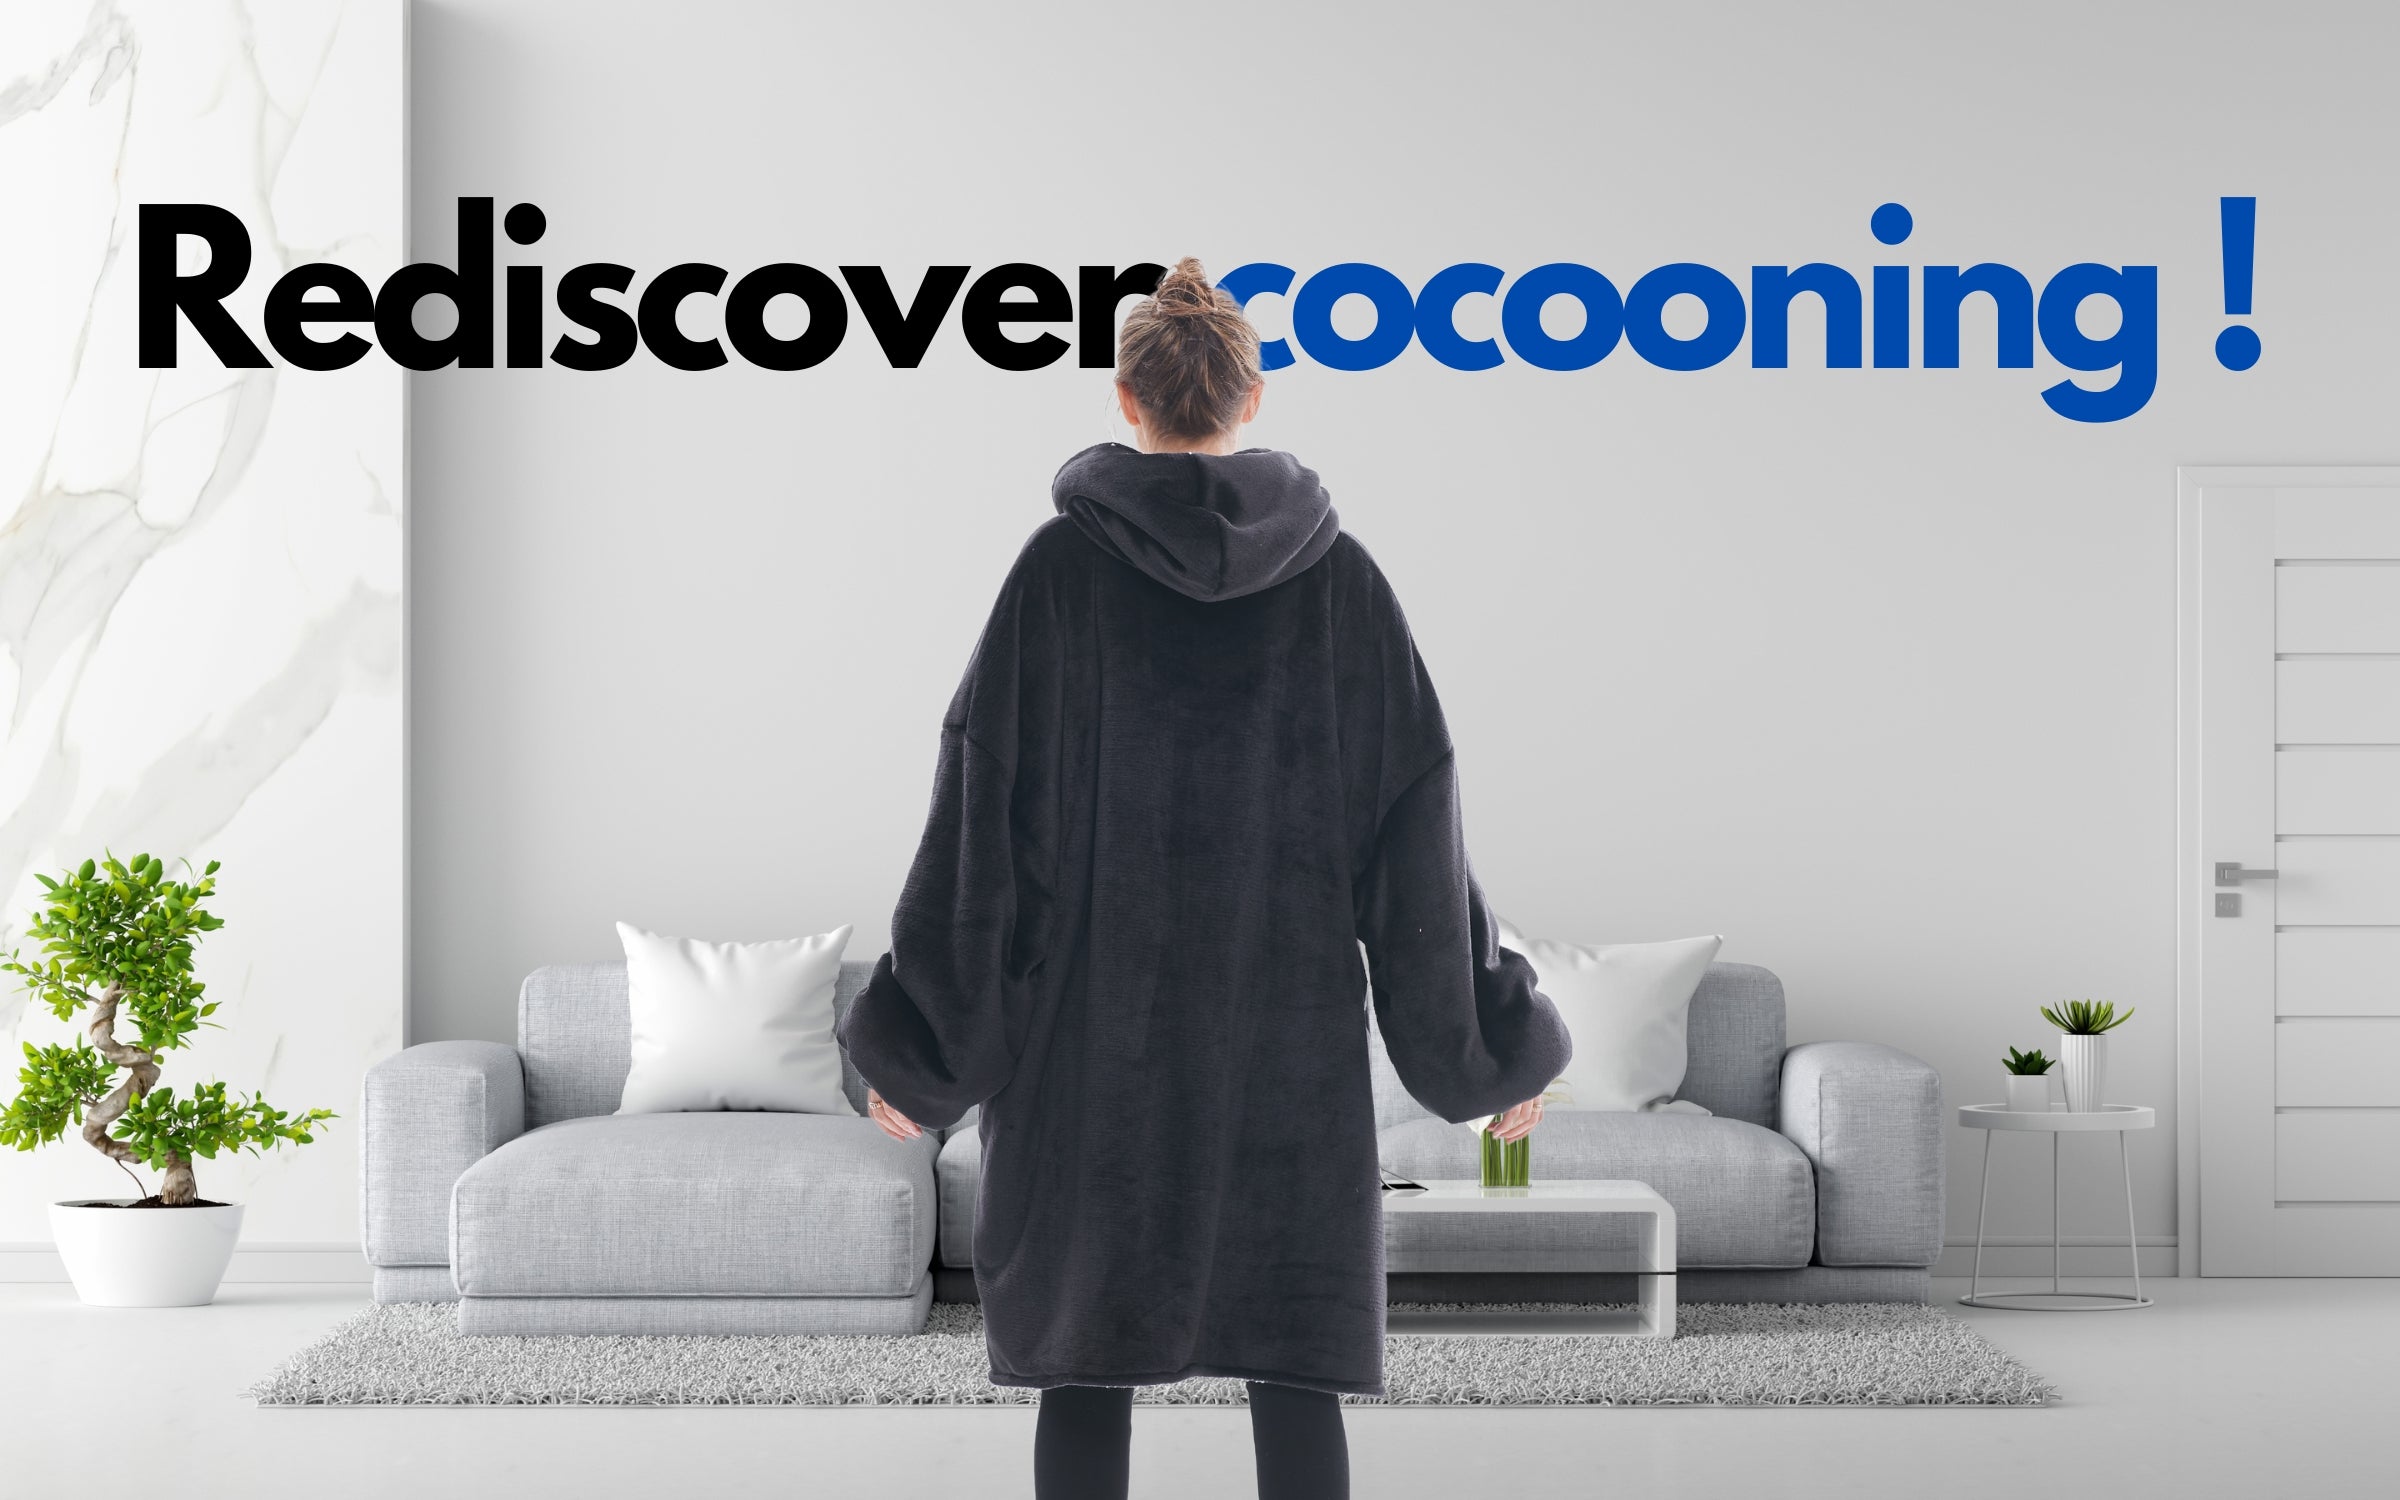 Load video: Rediscover cocooning women&#39;s plaid sweater black sherpa fleece lining sofa bedroom bed living room The Oversized Hoodie